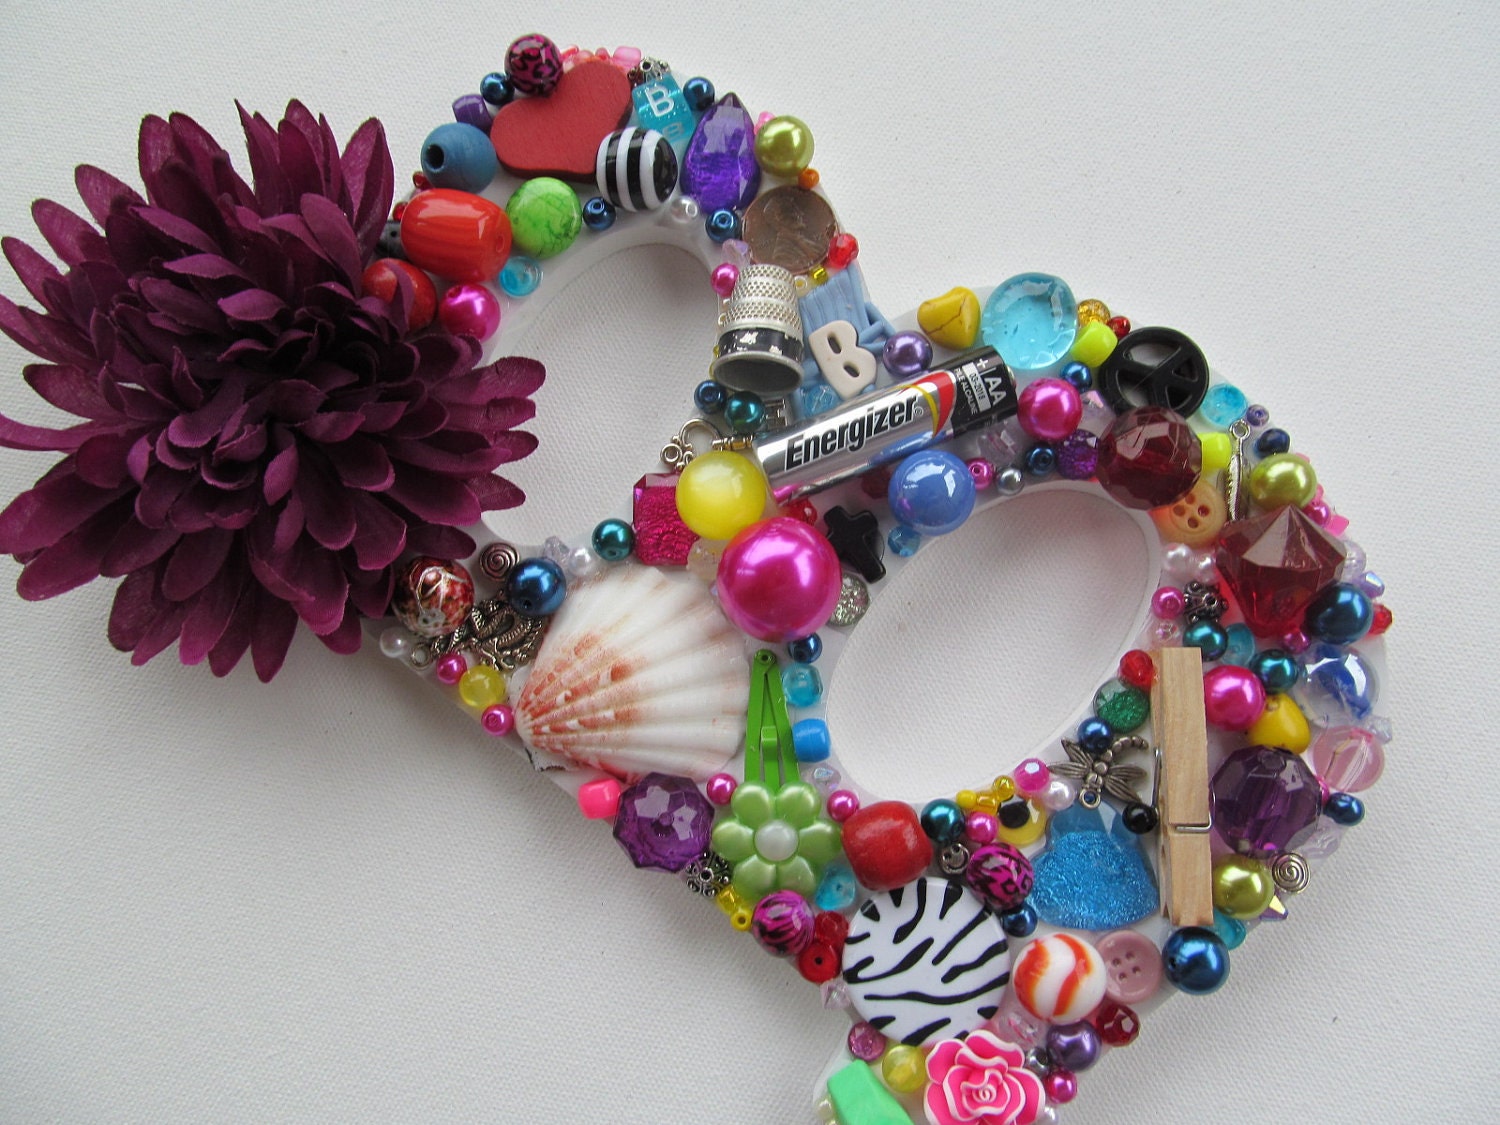 Letter B Embellished Jewelry, Beads, Shell, Zebra Colorful Wall Hanging - 2GirlsForever